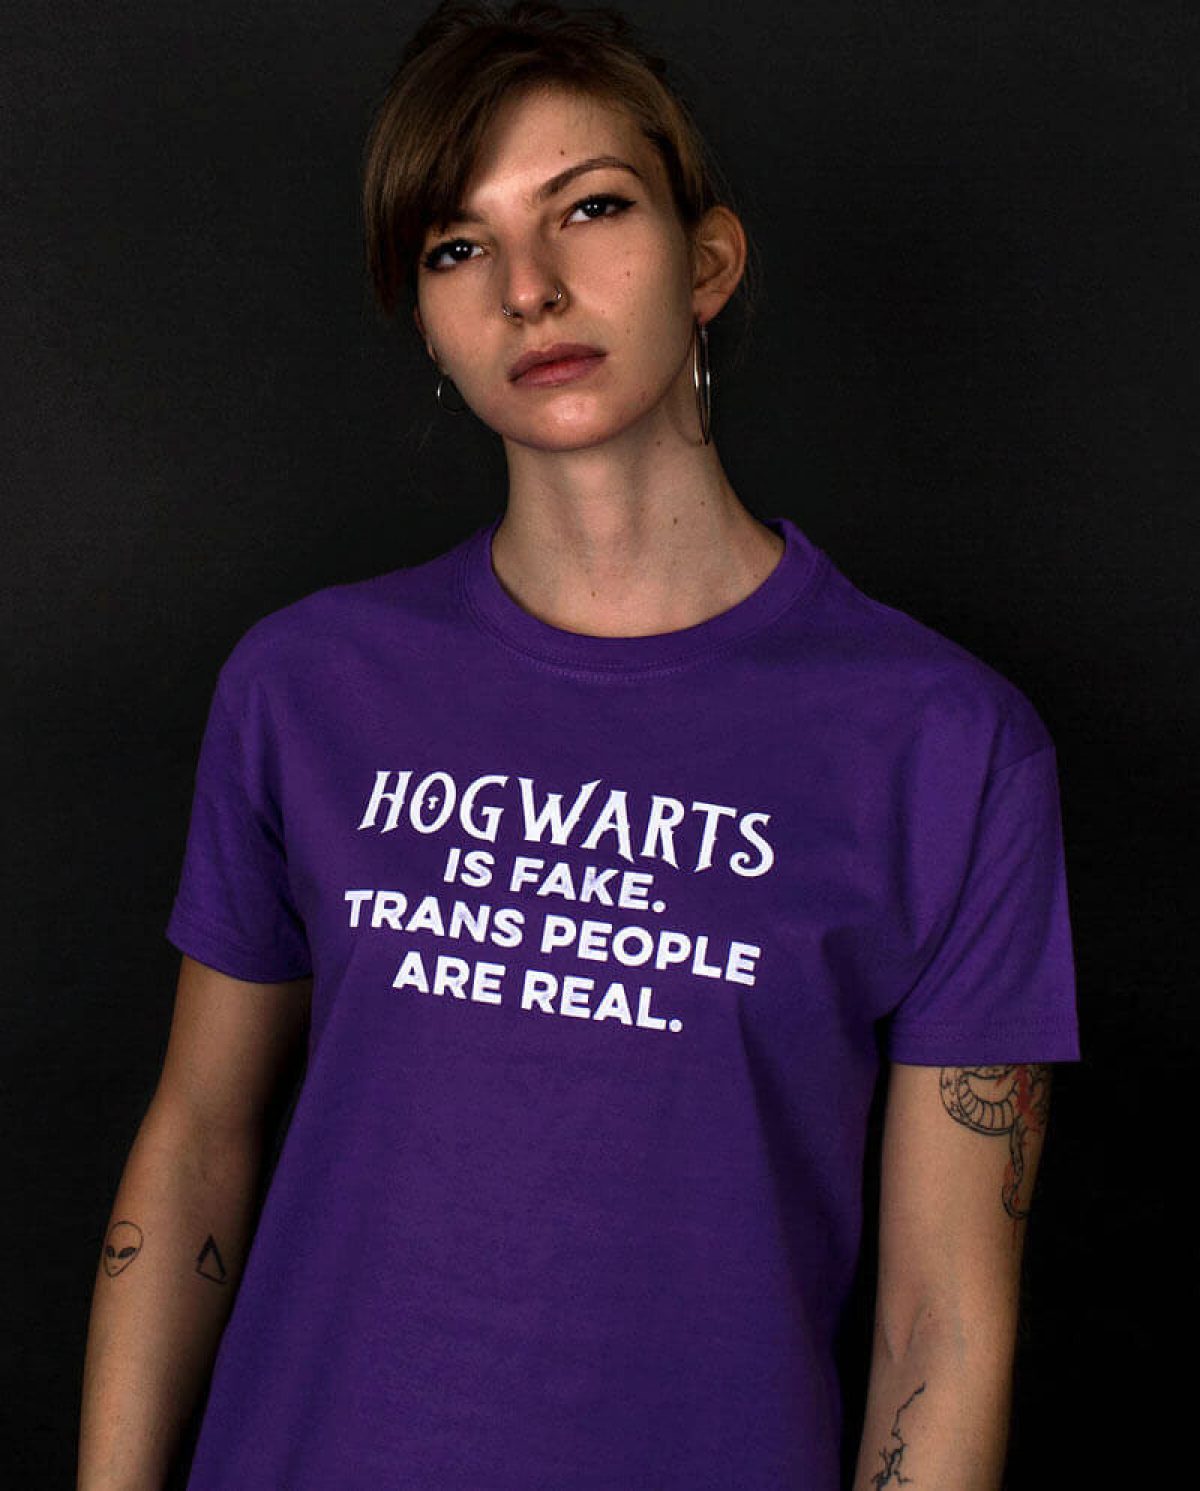 Hogwarts Is Fake, Trans People Are Real - JK ROWLING T-shirt